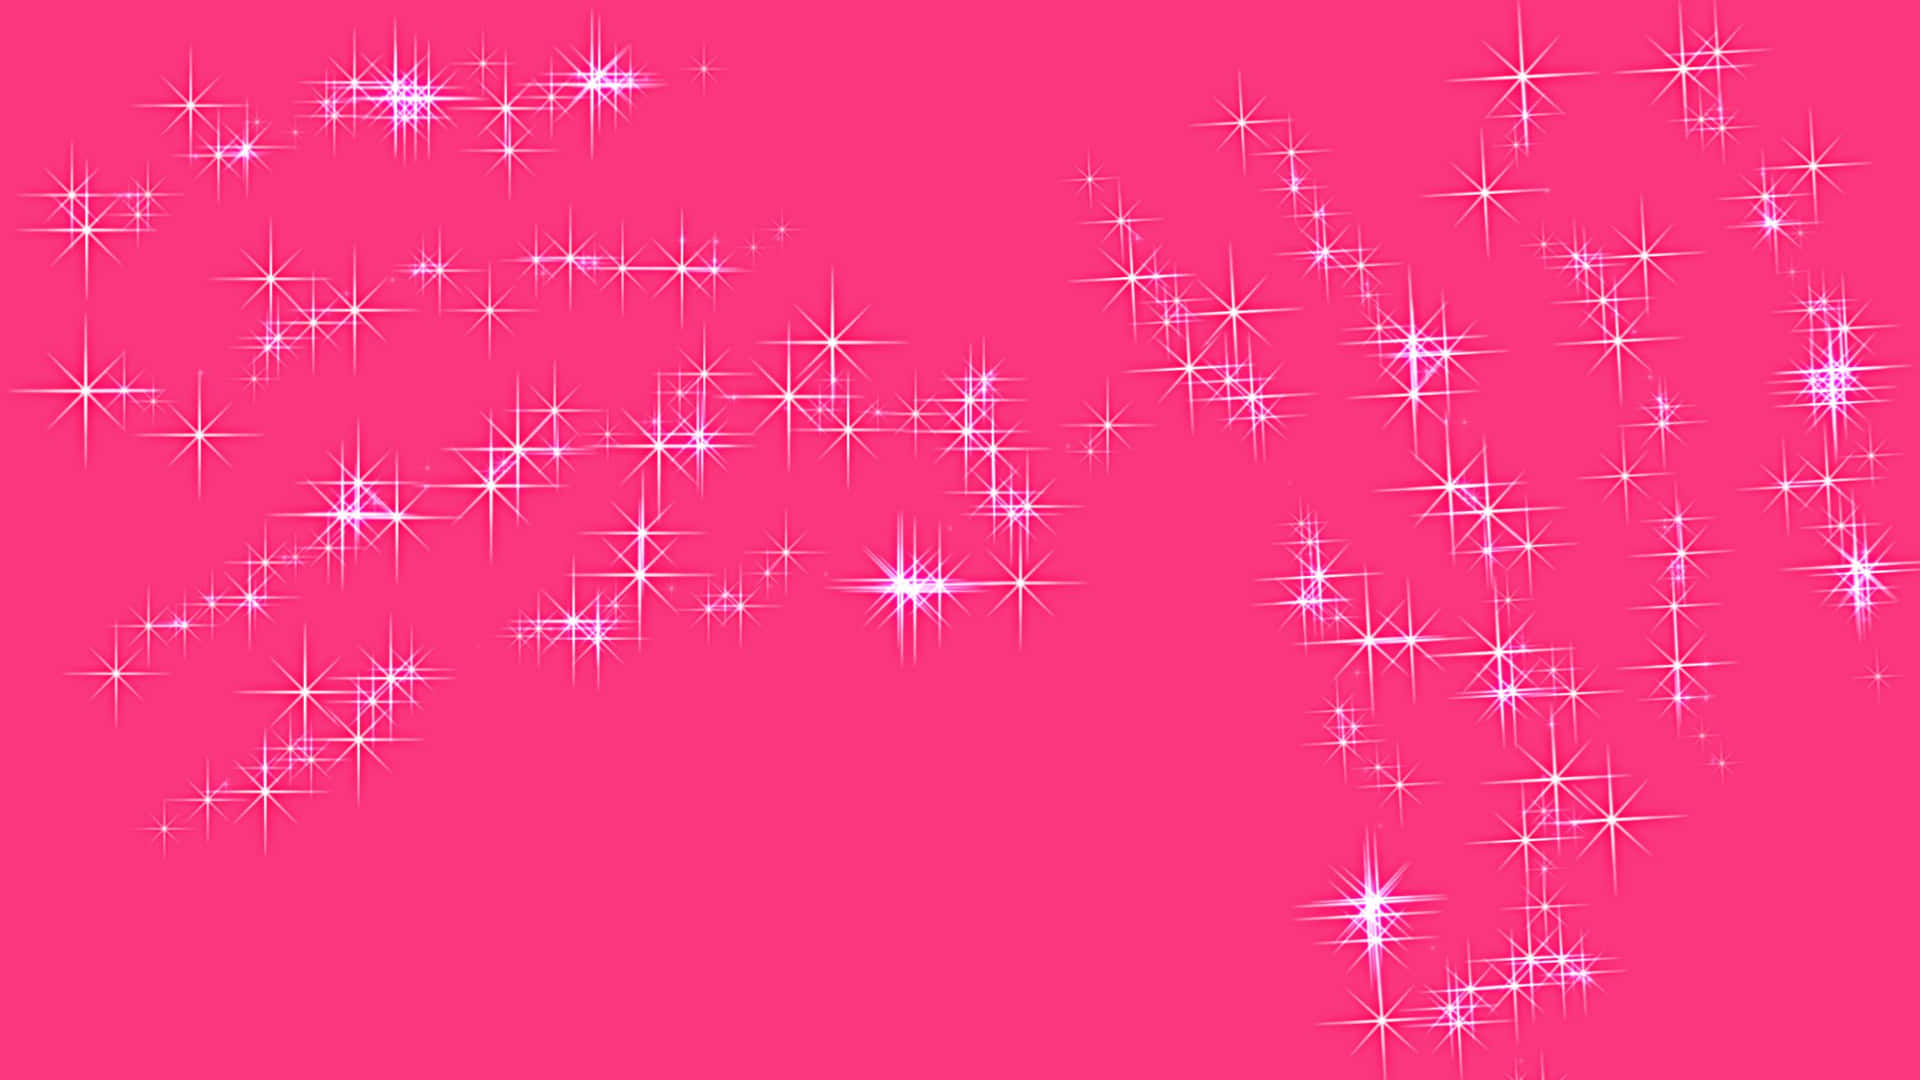 sparkly backgrounds gif